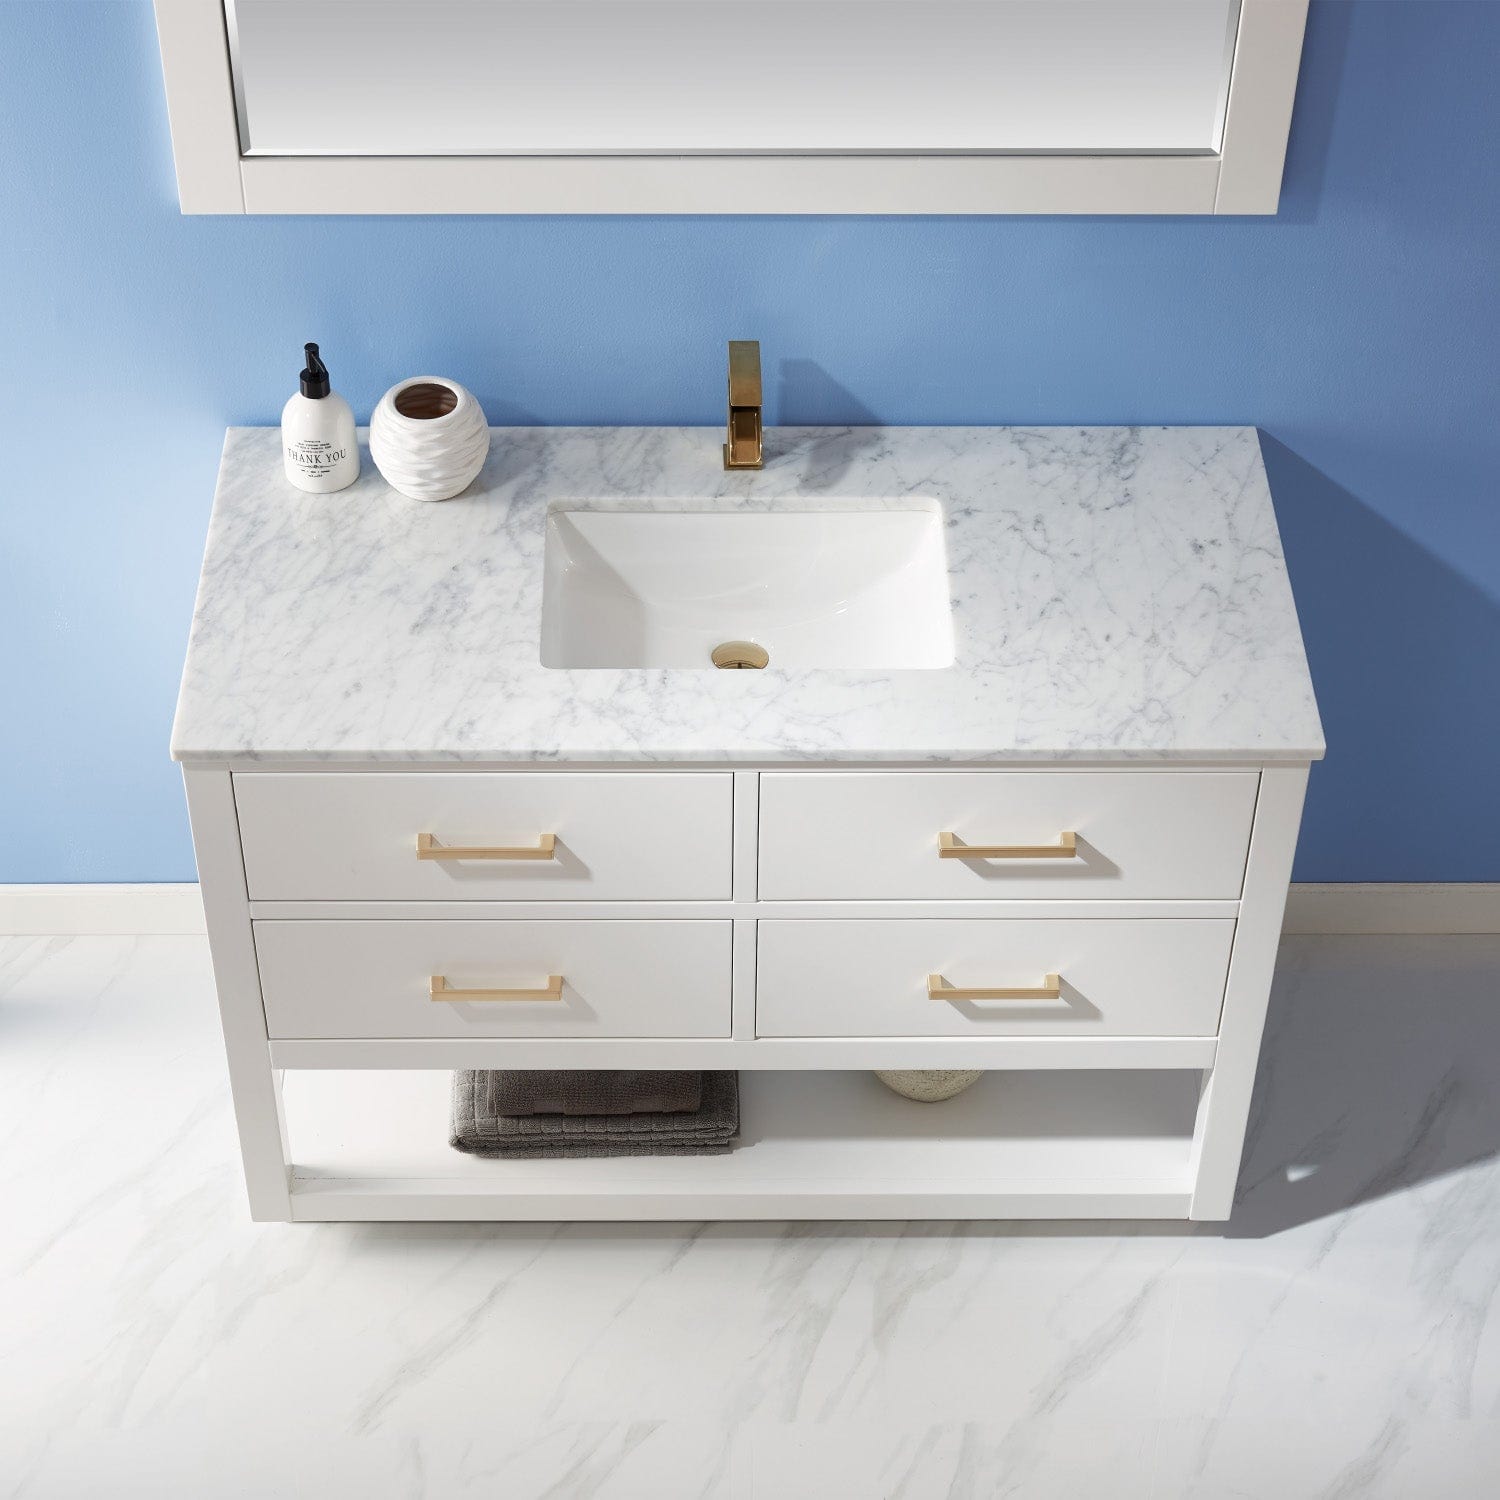 Altair Remi 48" Single Bathroom Vanity Set in White and Carrara White Marble Countertop with Mirror 532048-WH-CA - Molaix631112971492Vanity532048-WH-CA